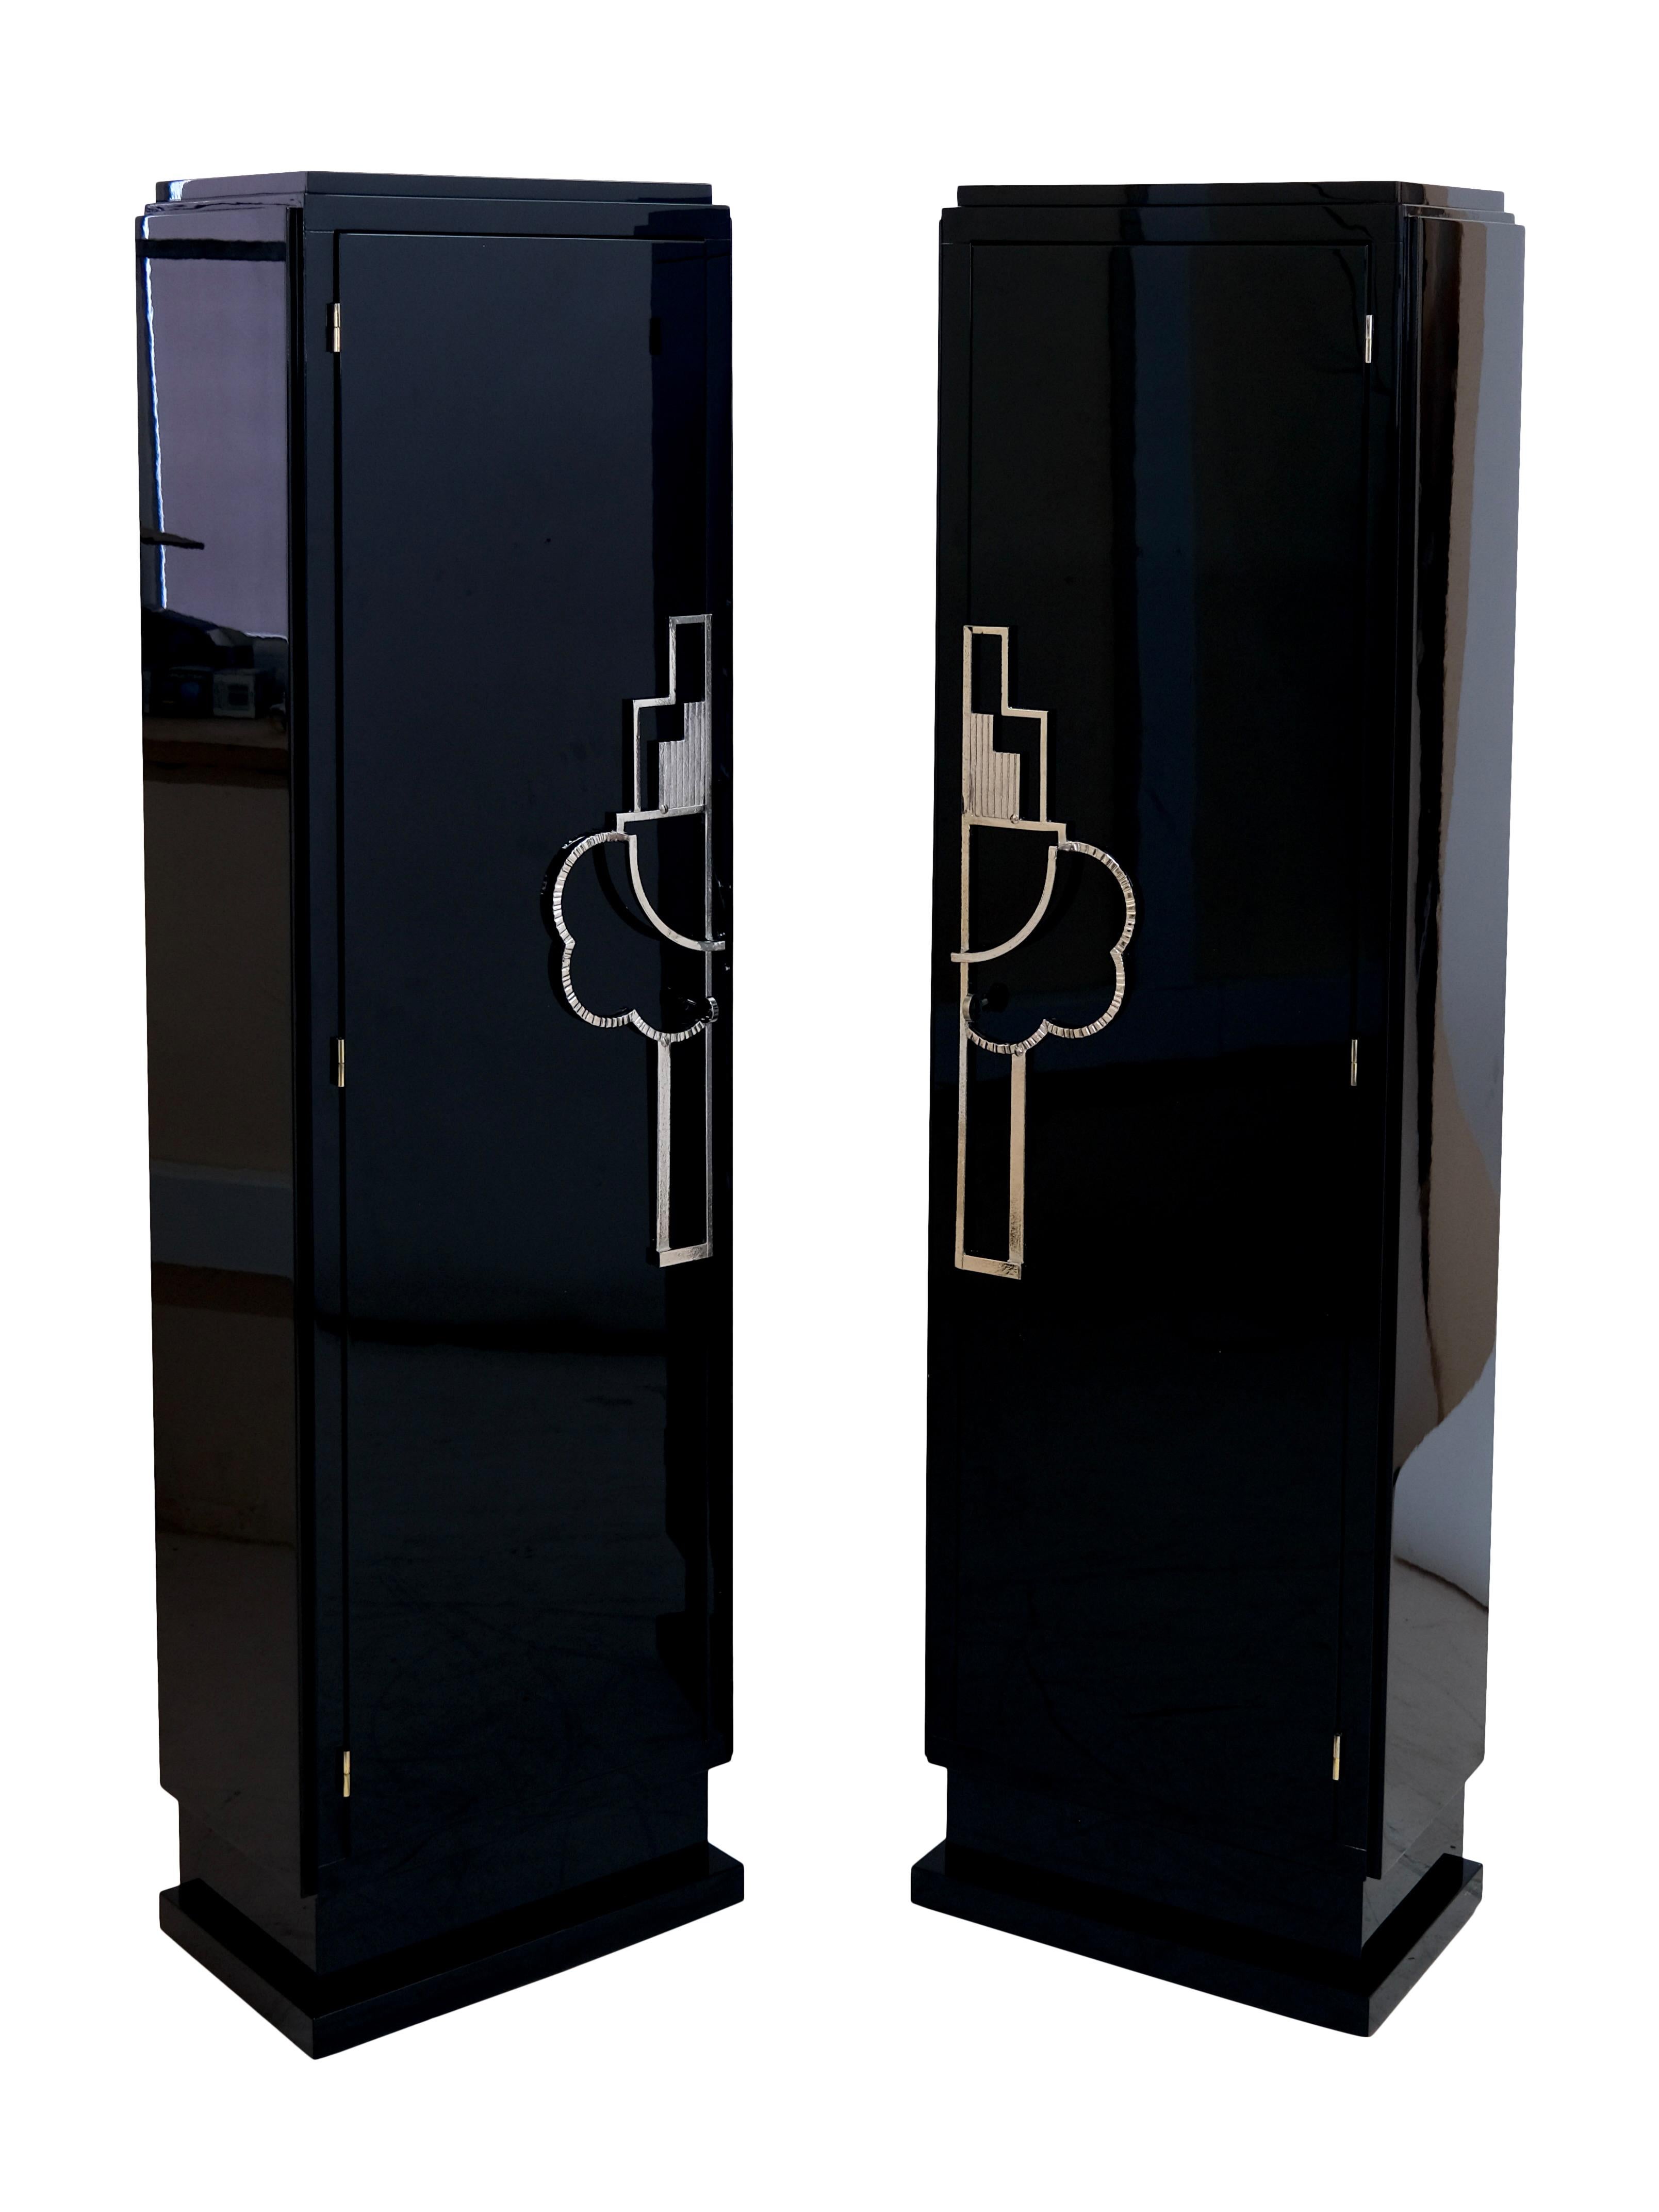 Pair of cabinets in black lacquer with large fittings

Pair of cabinets
Piano lacquer, black high gloss
Nickel-plated fittings
Base supplemented

Original Art Deco, France 1930s

Also available separately

Dimensions:
Width: 46 cm
Height: 162,5